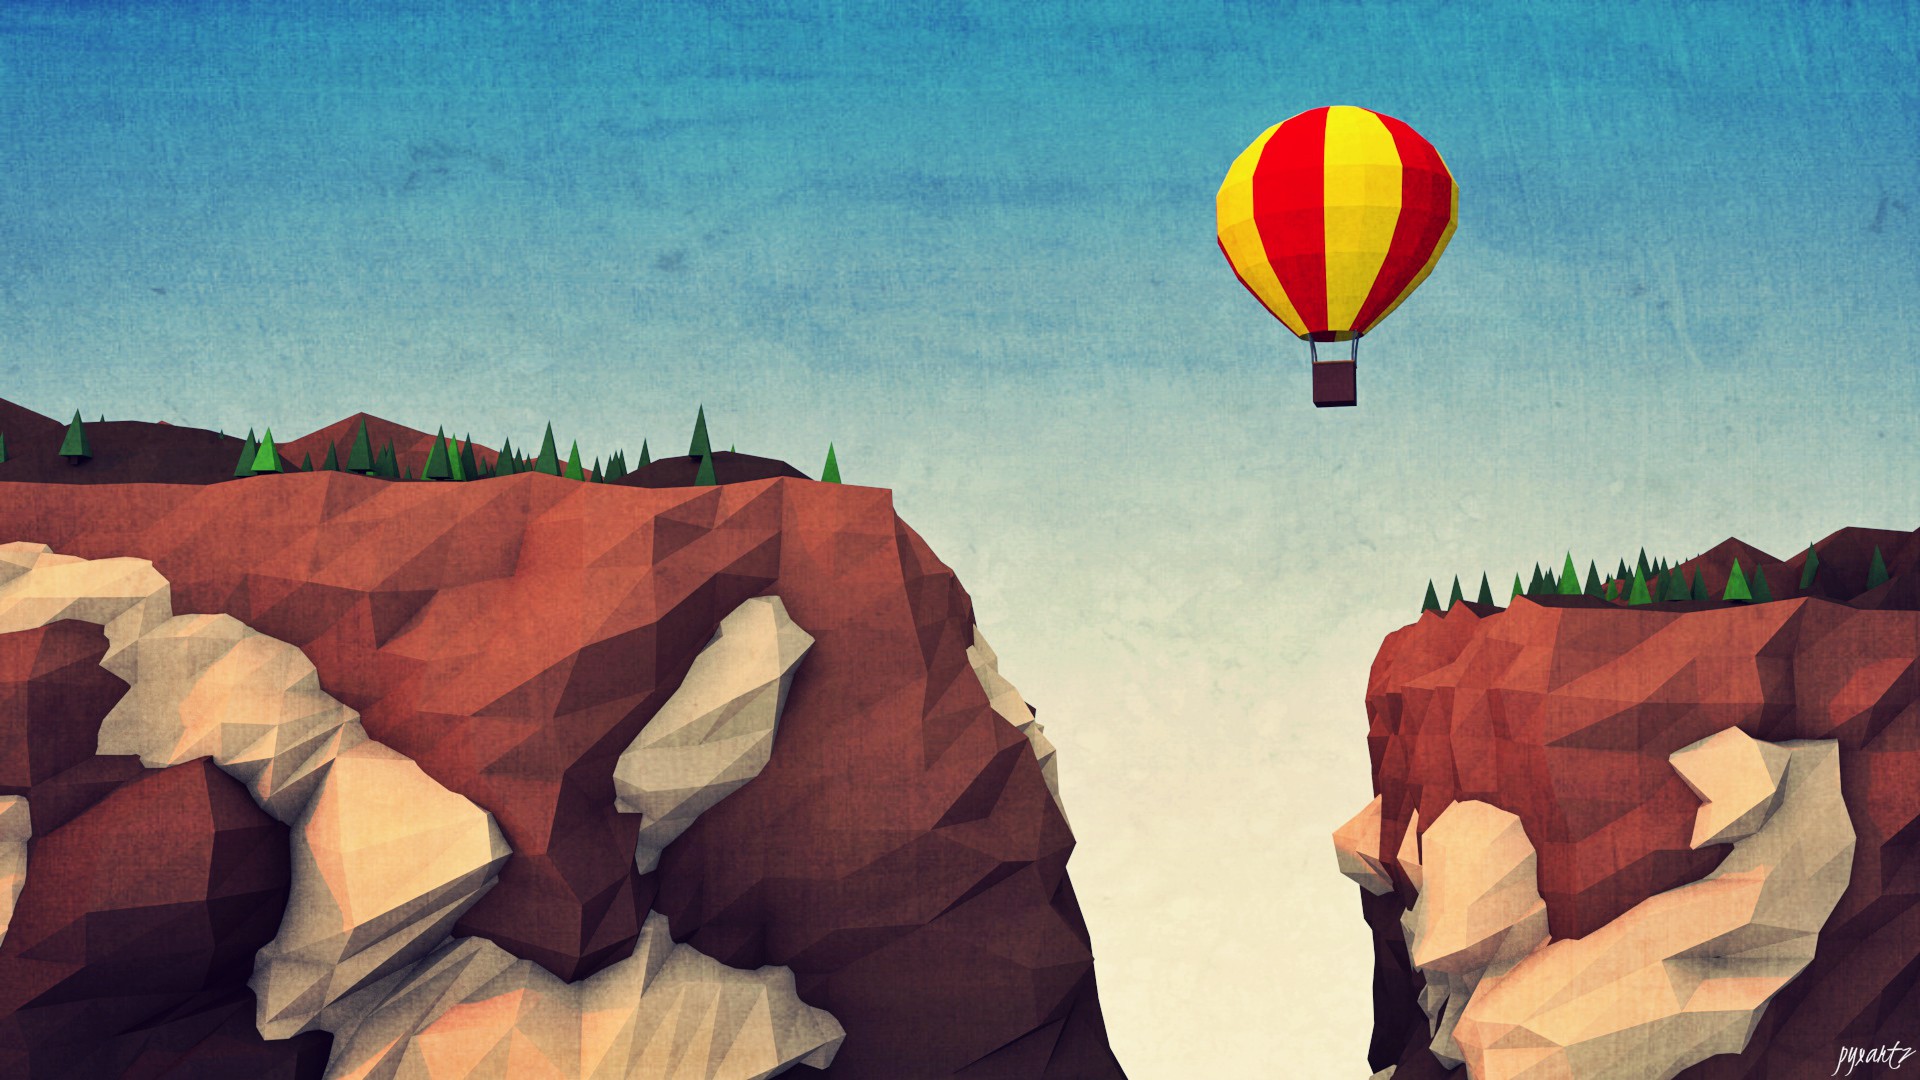 abstract, Pixelated, Digital art, Artwork, Minimalism, Low poly, Hot air balloons, Mountains, Snow, Sky Wallpaper